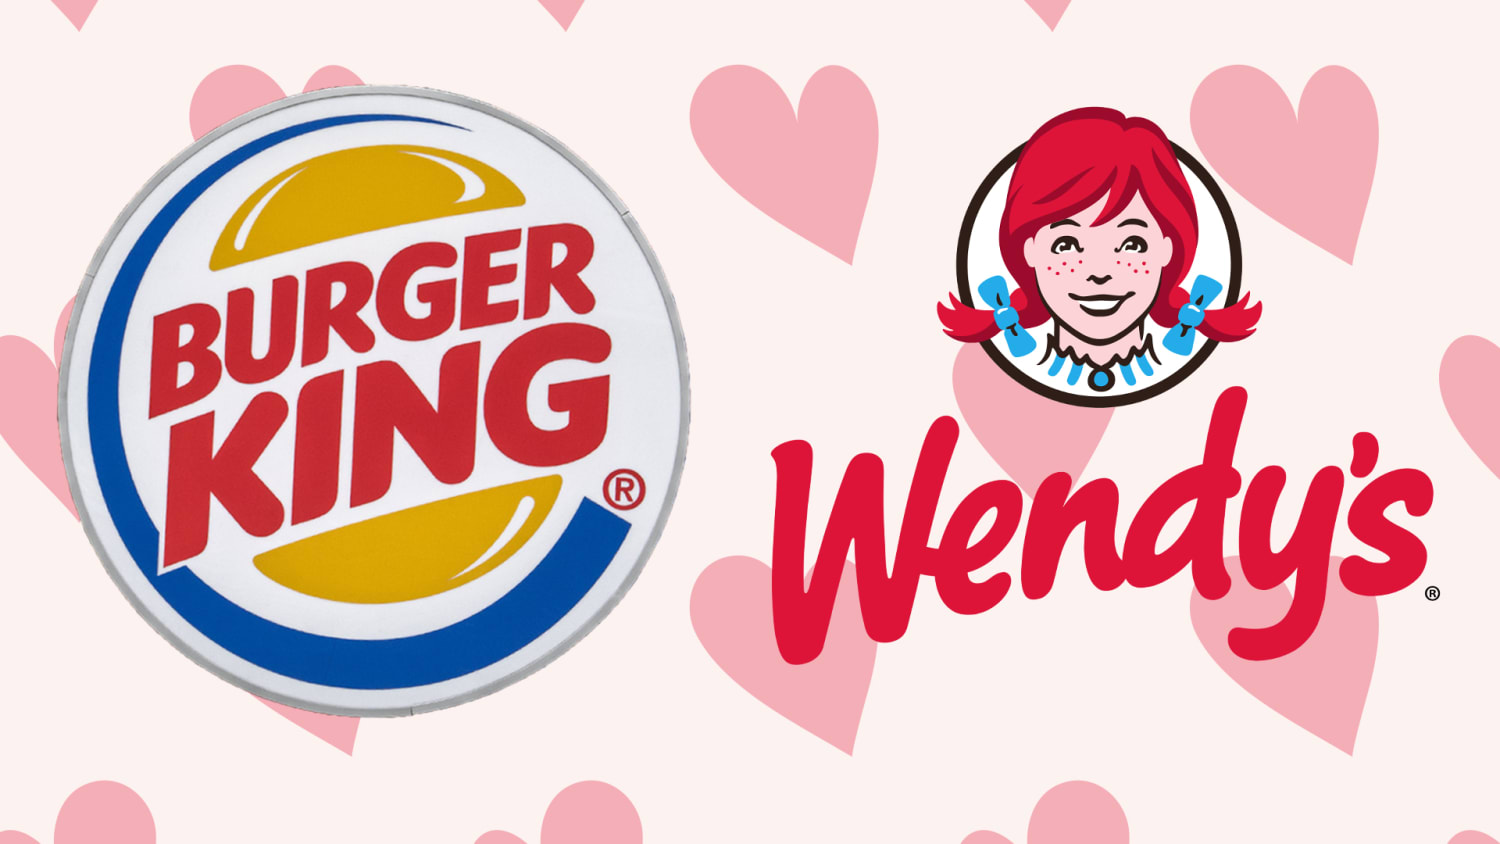 Burger King asked Wendy's to the prom, gets funny response